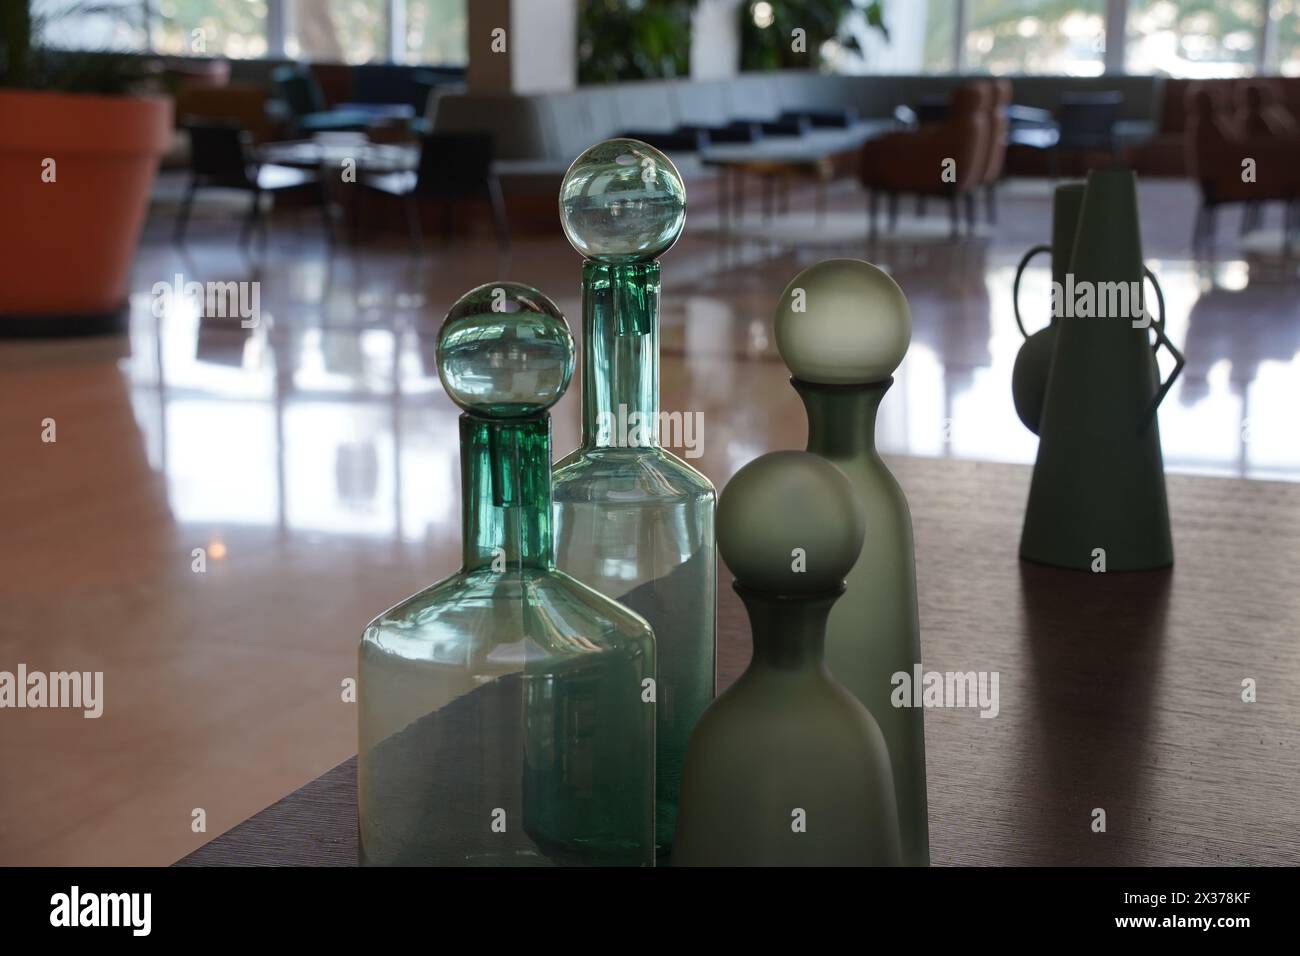 The interior of a hotel lobby. Decorative Glass vases Stock Photo